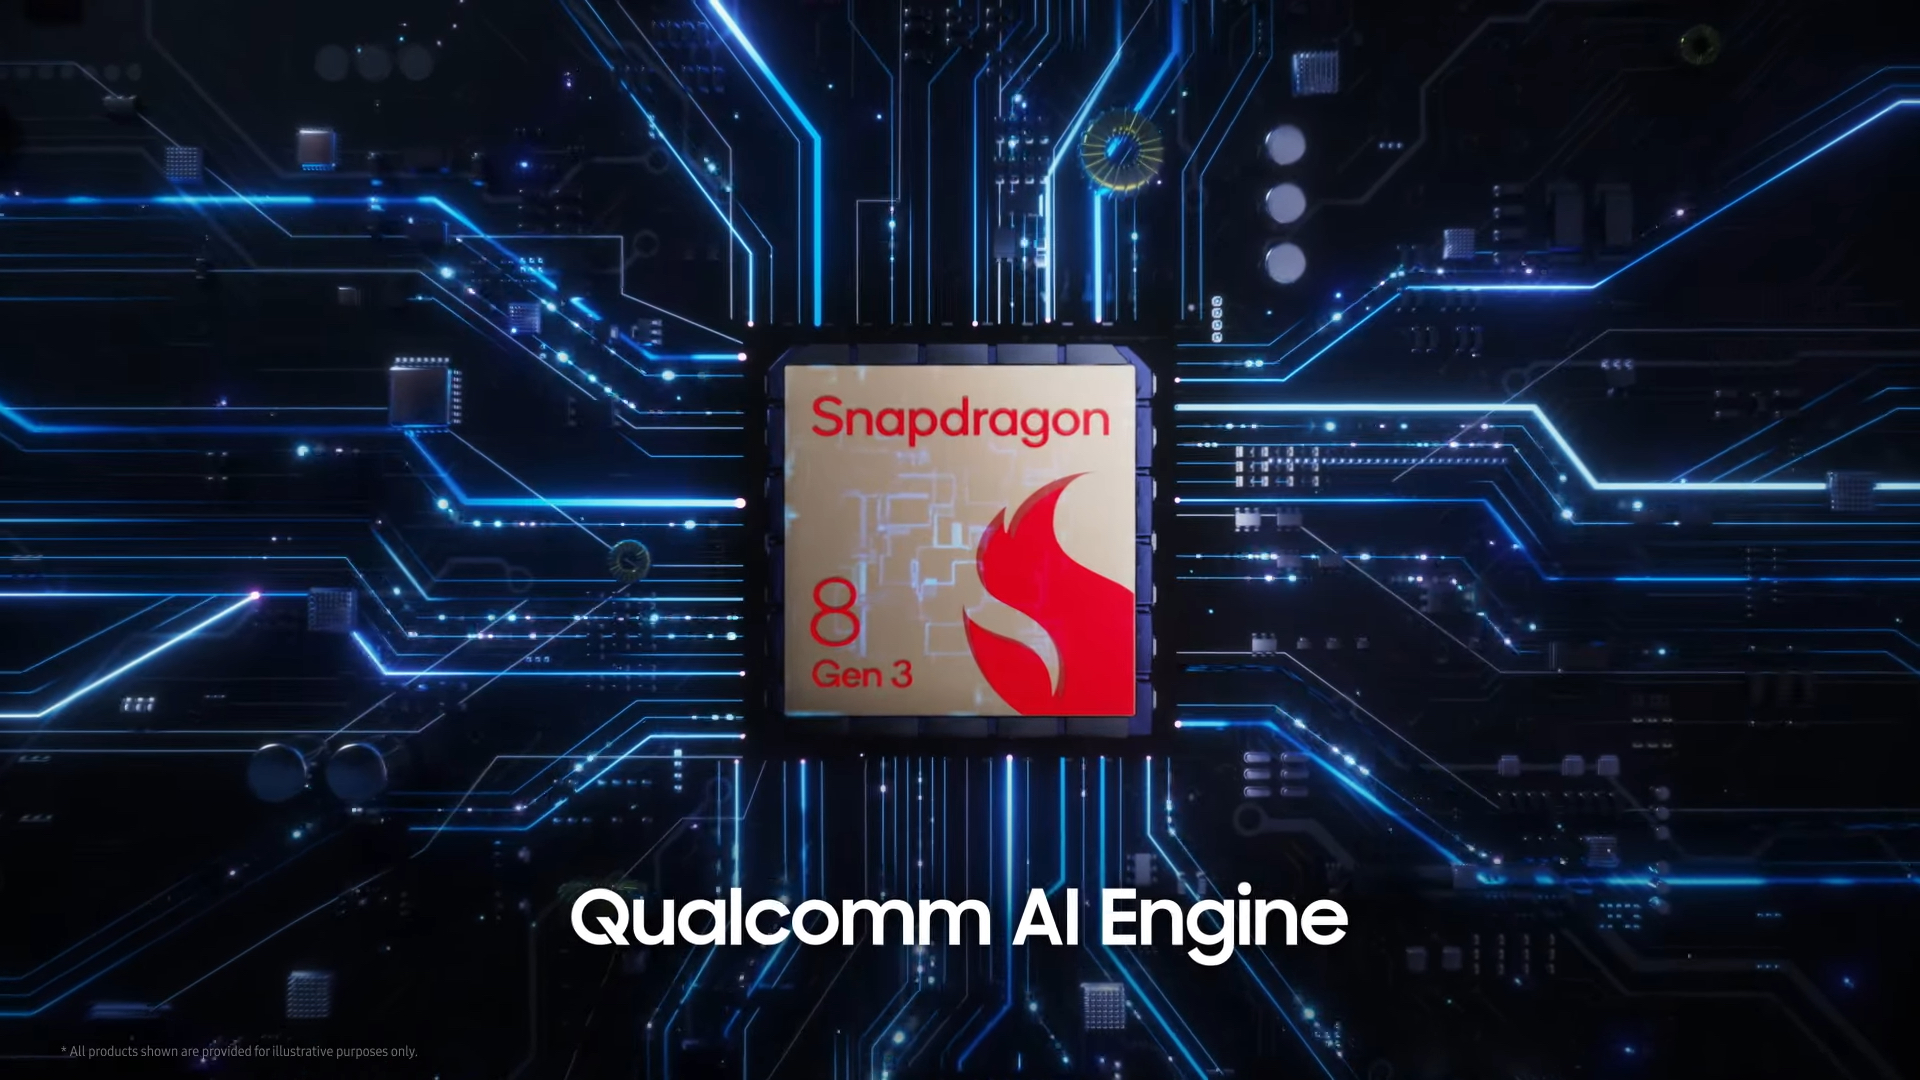 What is Snapdragon 8 Gen 3 for Galaxy?